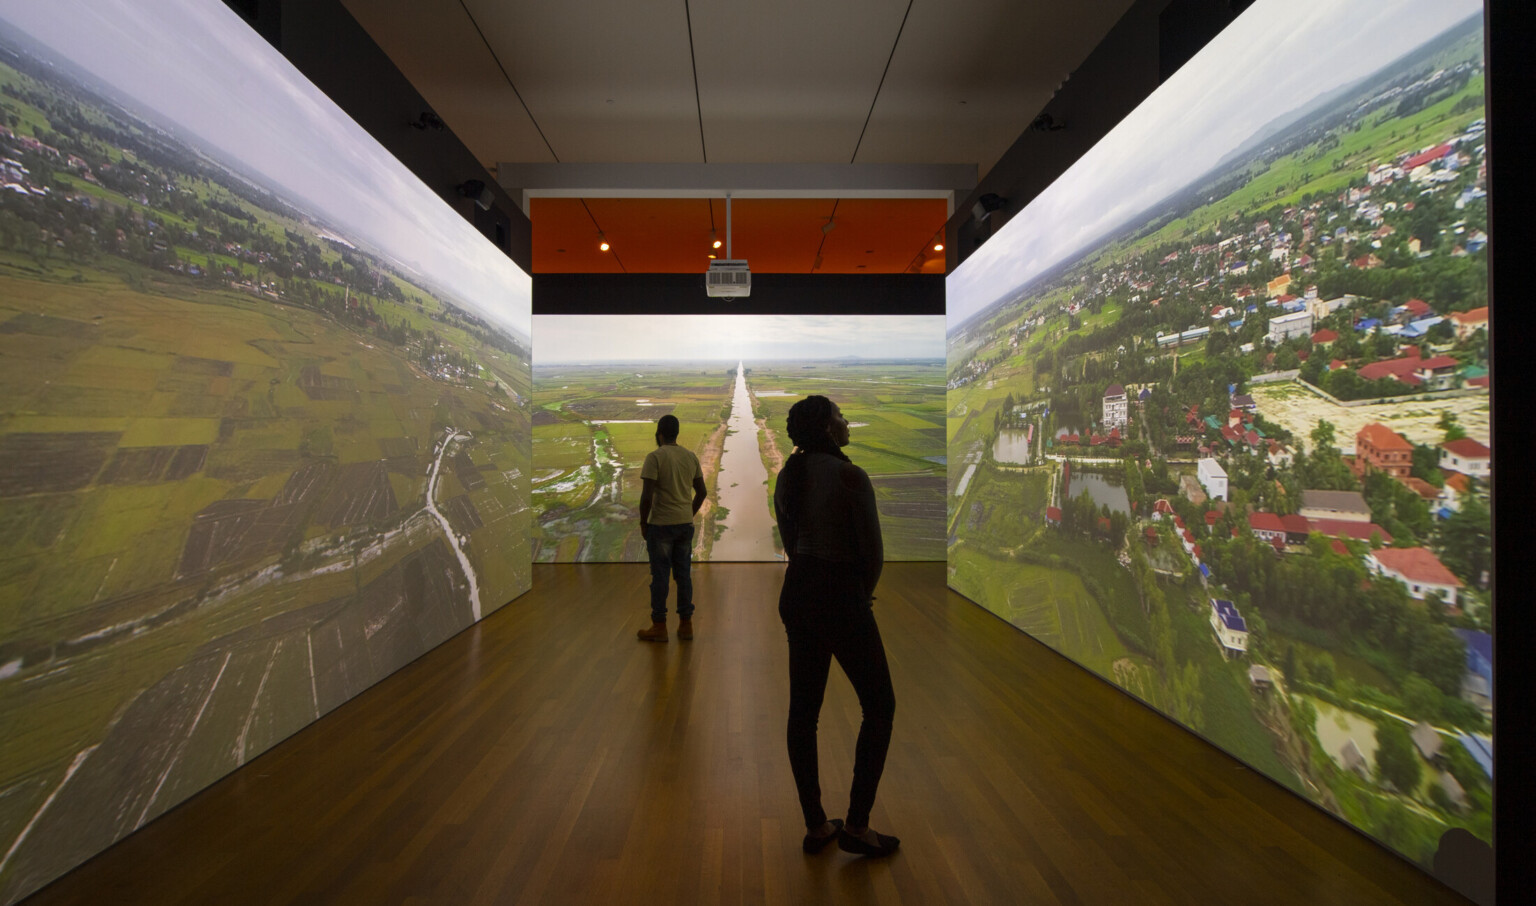 two darkened silhouettes stand in room with three walls with aerial images of farm lands, houses, and a river projected